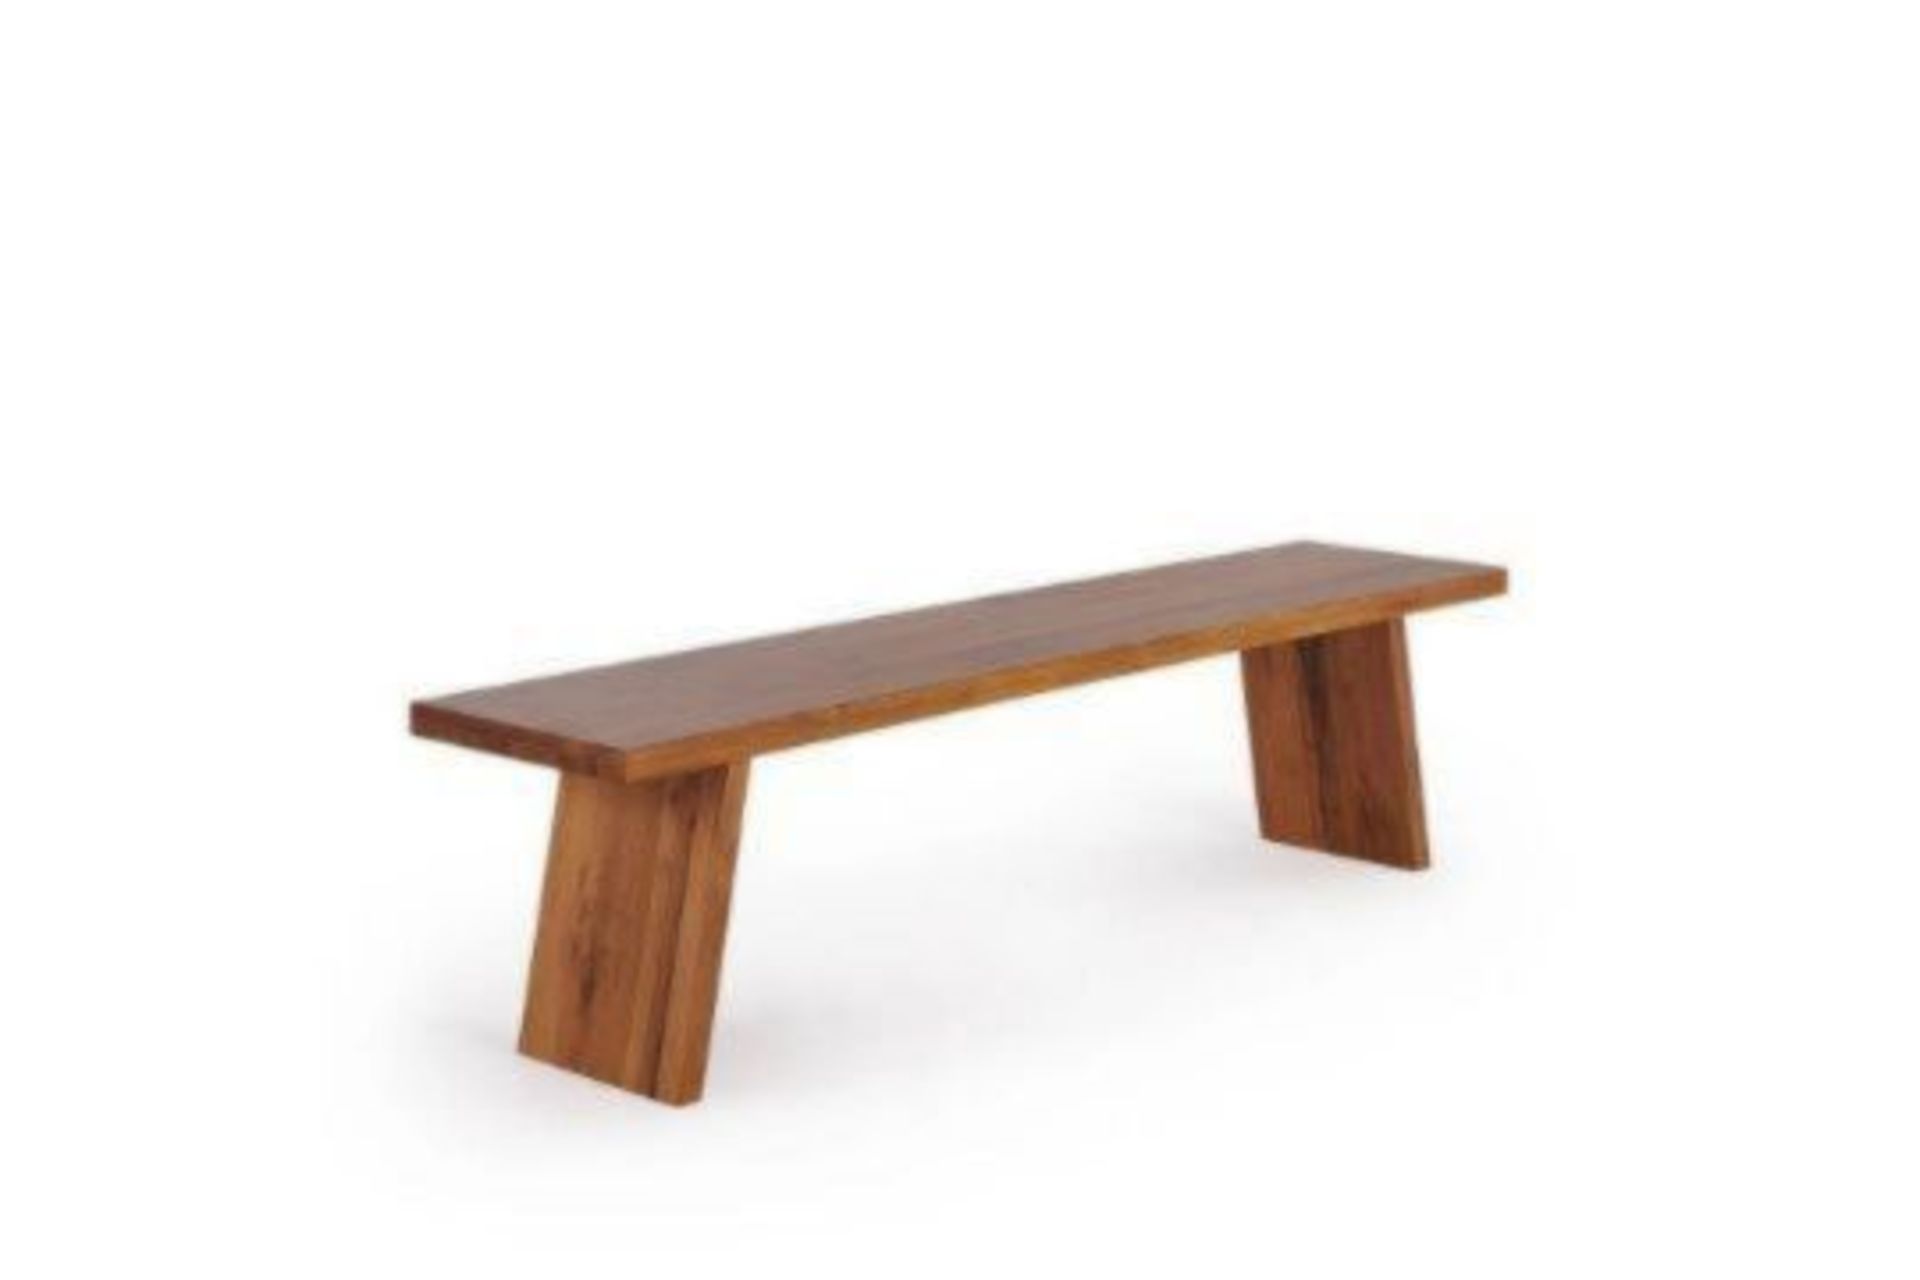 4 X New Boxed - Cantilever Natural Solid Oak Bench. 180cm Long. RRP £330 EACH, TOTAL LOT RRP £1,320.